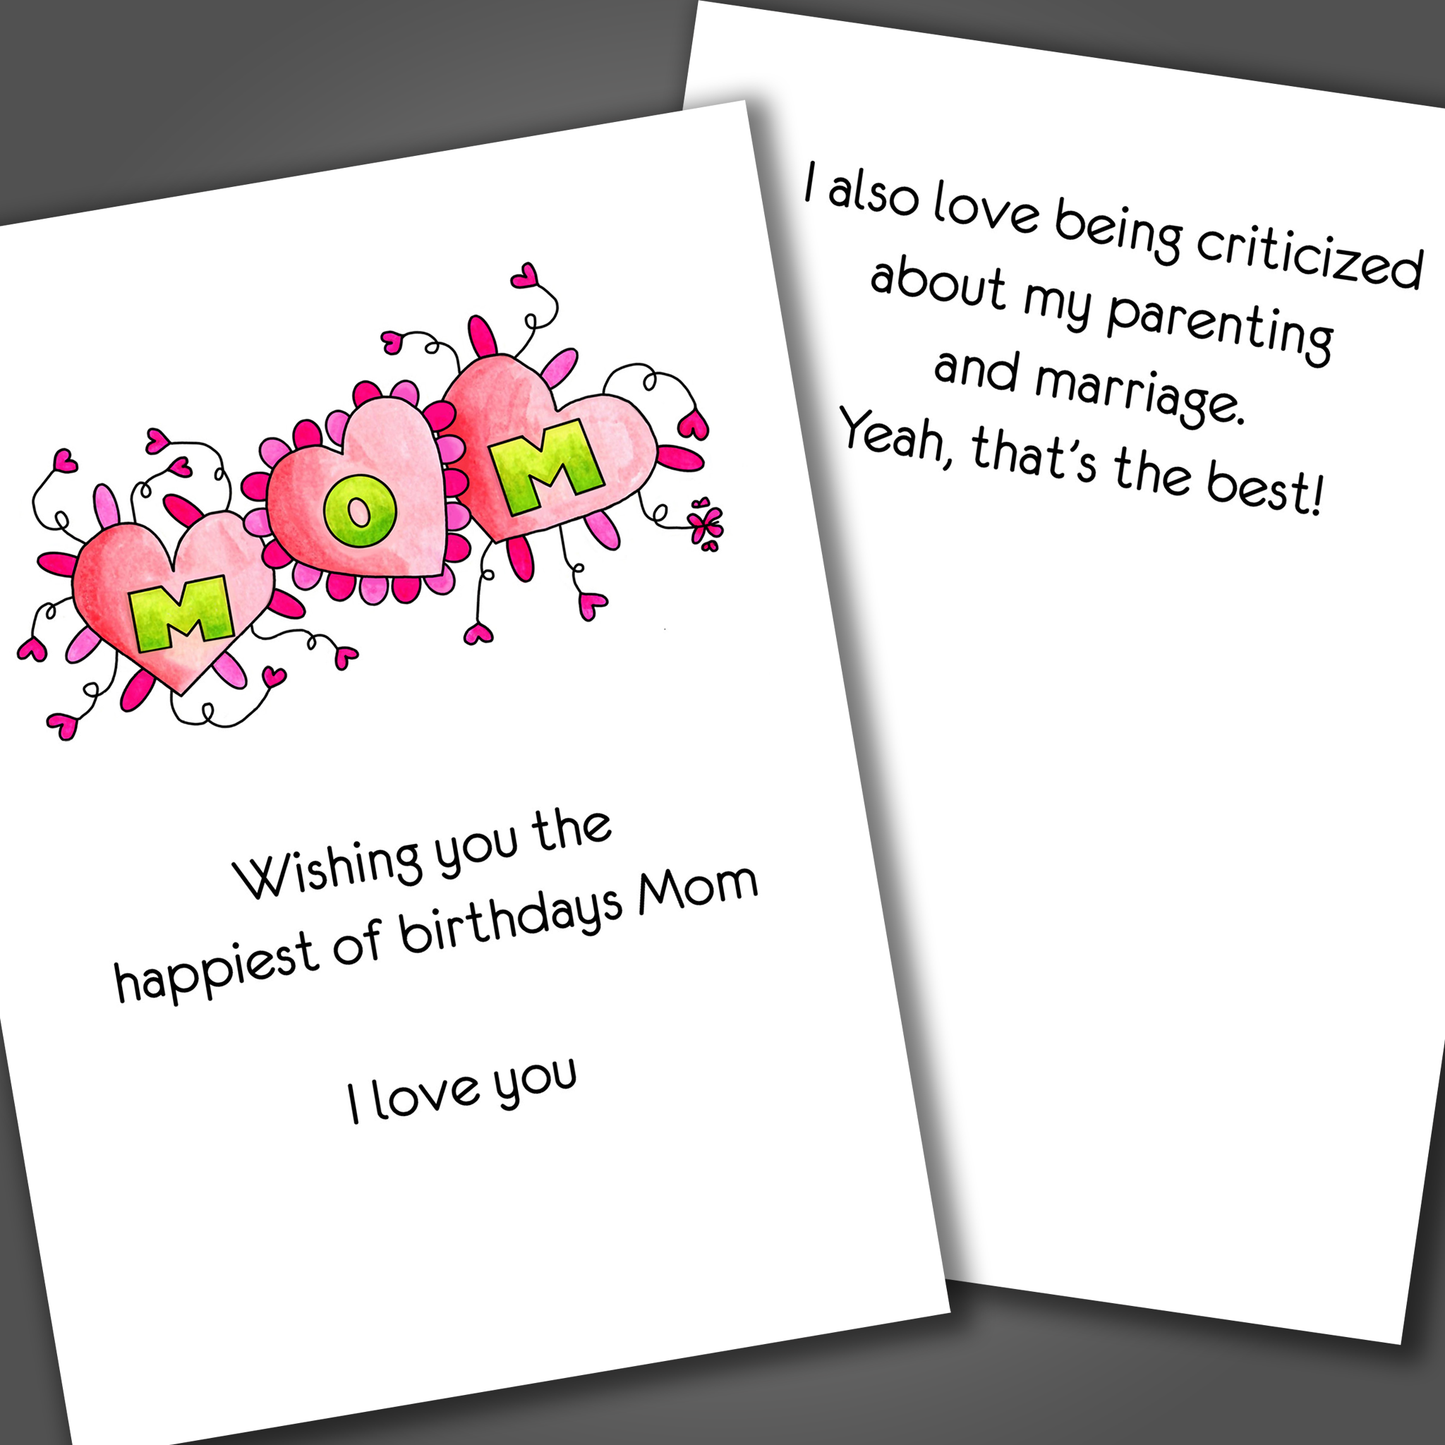 Funny happy birthday mom card with the word mom drawn in green and pink on top of three hearts and a funny joke inside wishing her a happy birthday.